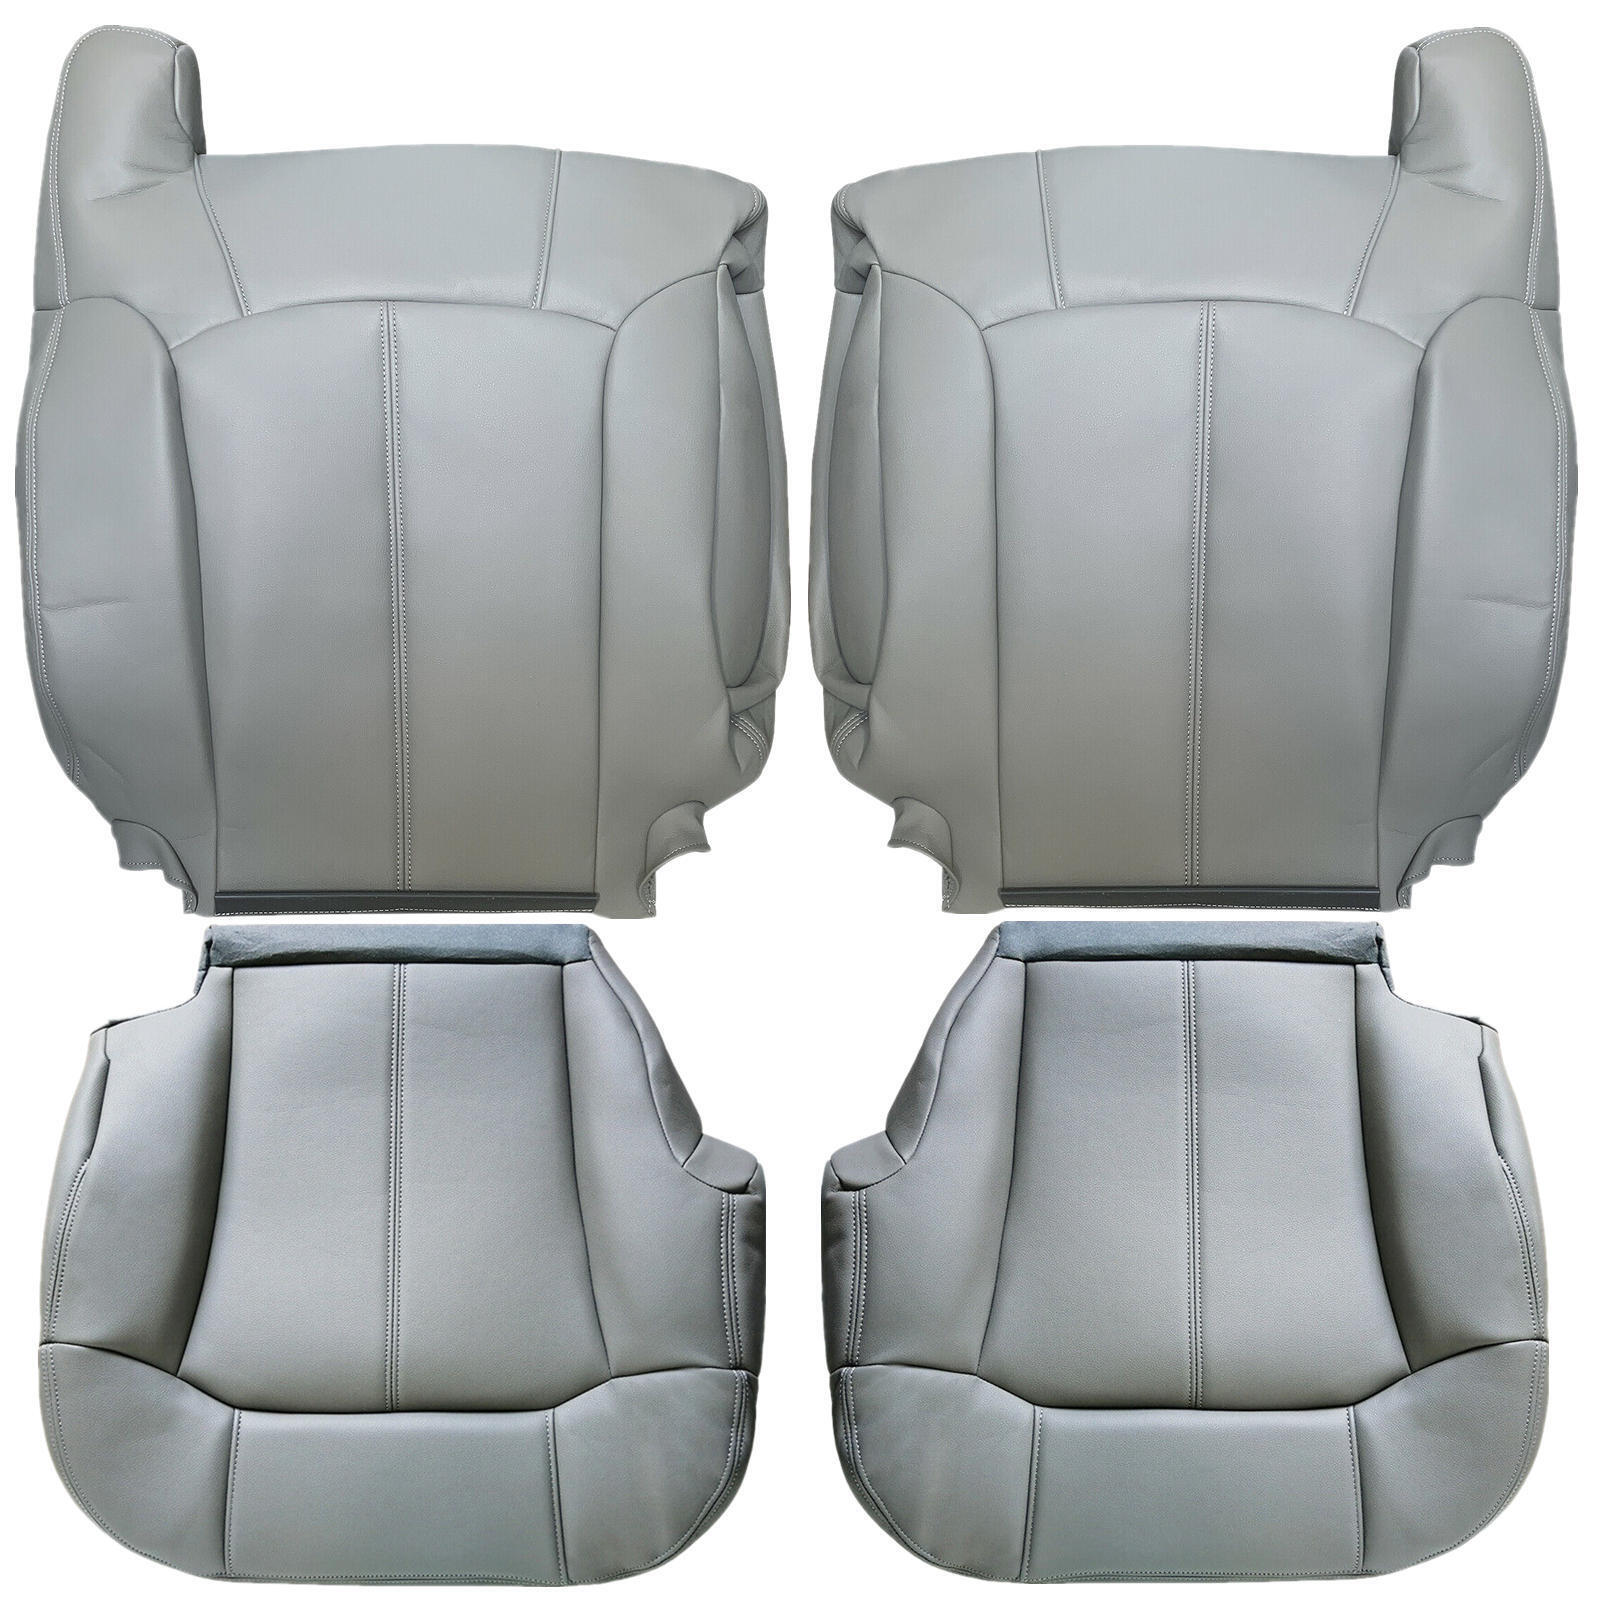 For 1999-2002 Chevy Silverado Tahoe Suburban Leather Seat Covers Pewter Gray